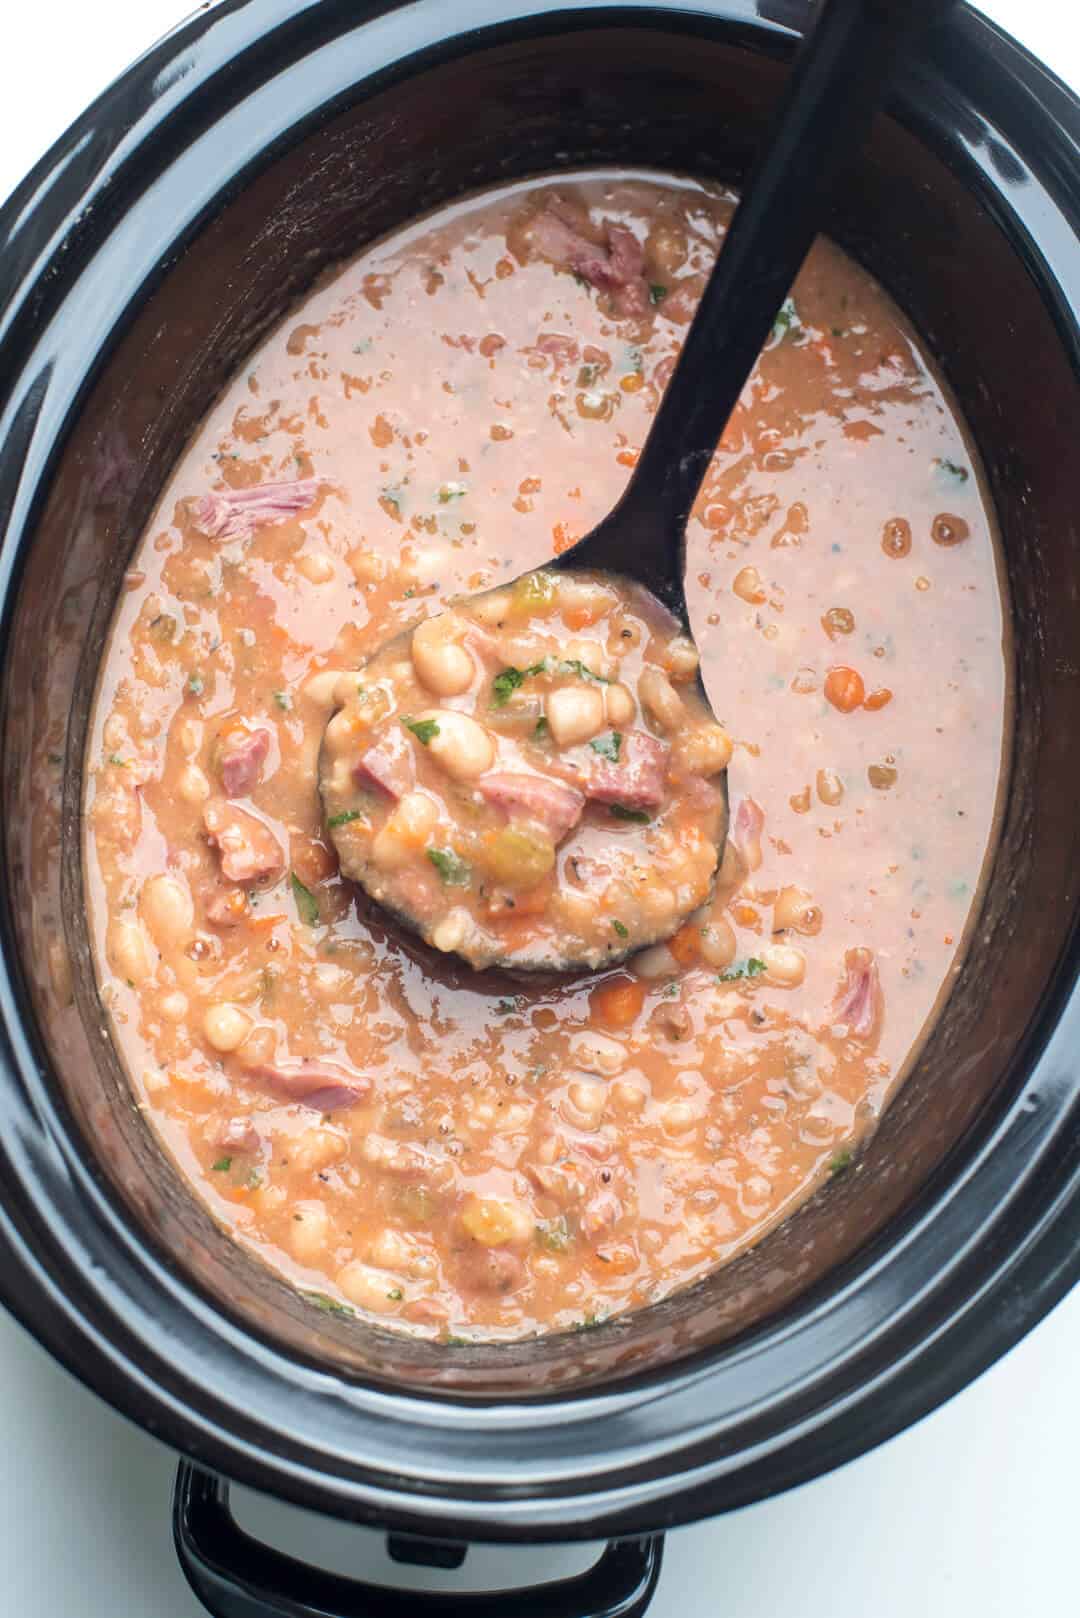 A ladle scoops ups some of the Ham and Bean Soup from the slow cooker.